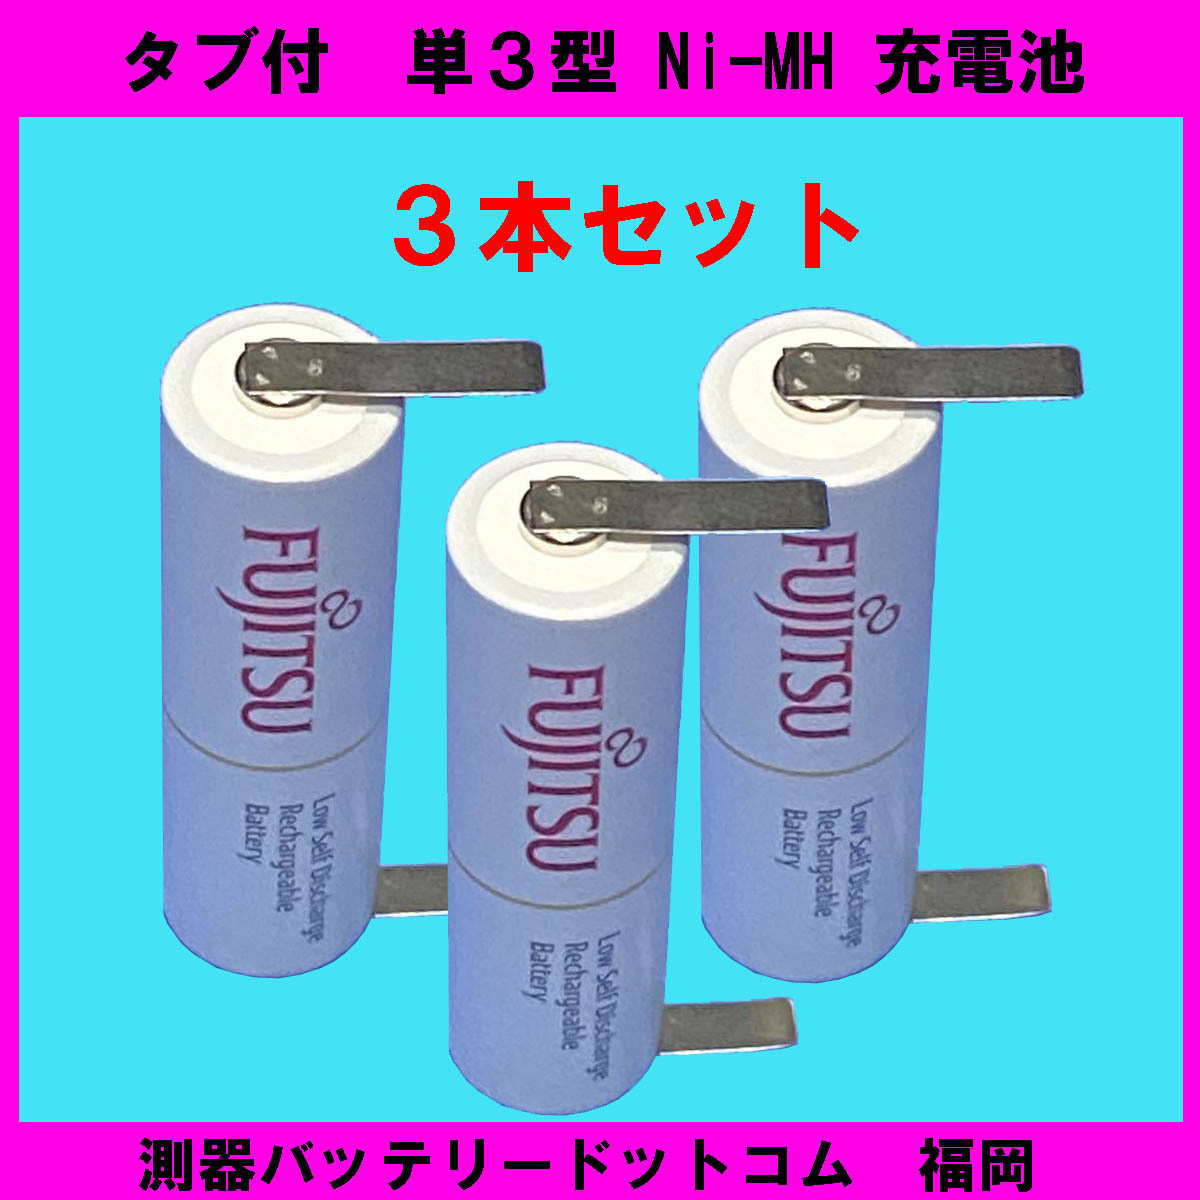  Fujitsu single 3tab attaching NI-MH rechargeable battery (3ps.@) Nickel-Metal Hydride battery,hige..? battery exchange?,,